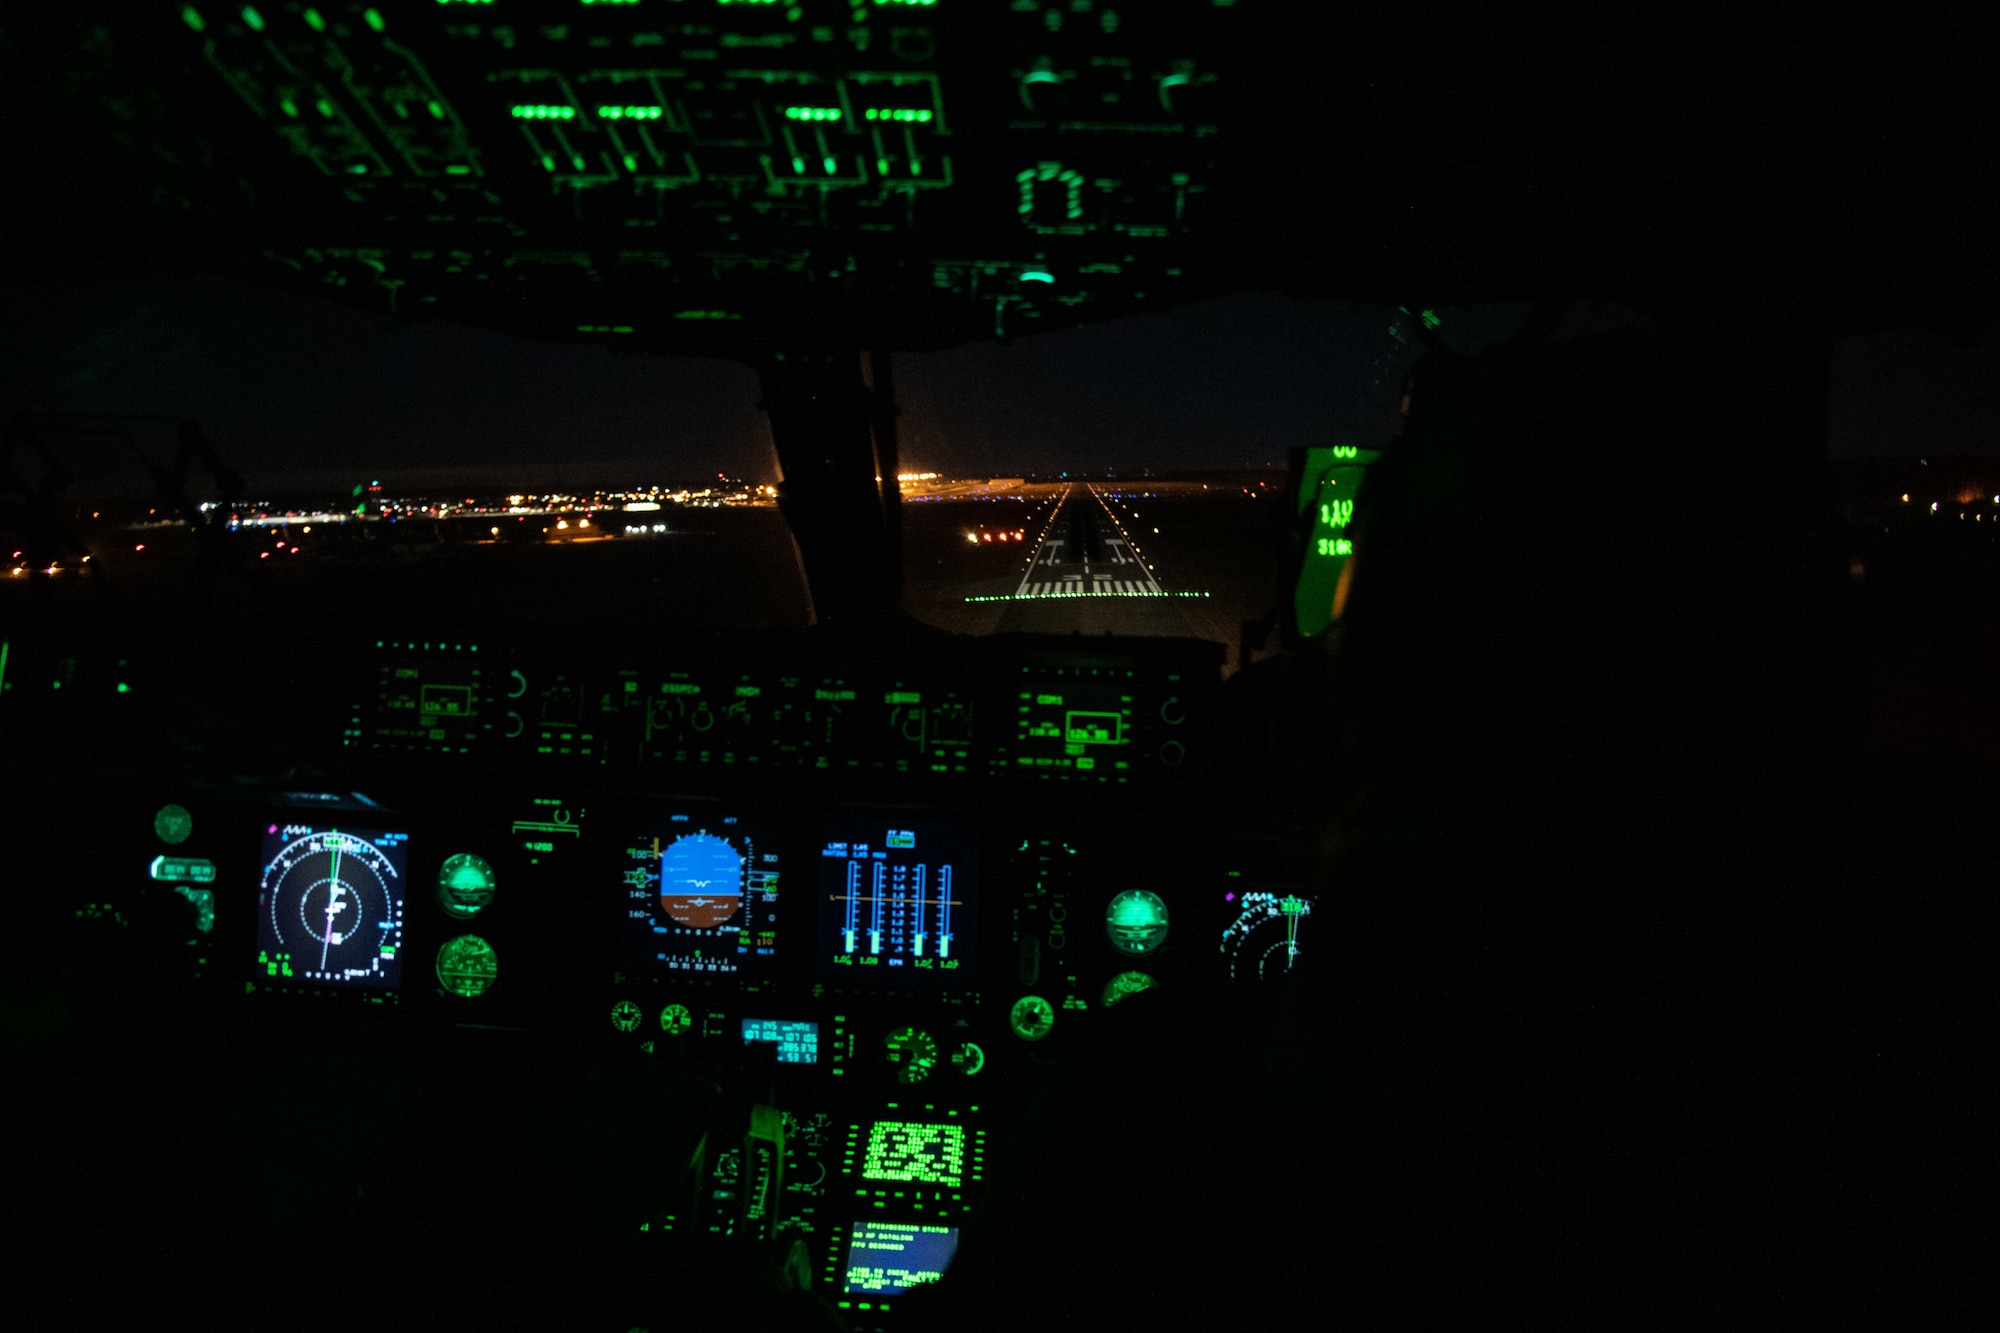 1st Lt. Zachary Pruitt, 3rd Airlift Squadron pilot, and Capt. Corey Landis, 3rd AS instructor pilot, prepare to land a C-17 Globemaster III, while wearing night vision goggles, at Dover Air Force Base, Delaware, Jan. 28, 2021. In combat, flying at night without artificial light minimizes visibility of the aircraft and reduces threat from potential enemies. The 3rd AS routinely trains to support global engagement through direct delivery of time-critical theater deployment assets and ensure aircrew operational readiness. (U.S. Air Force photo by Airman 1st Class Faith Schaefer)